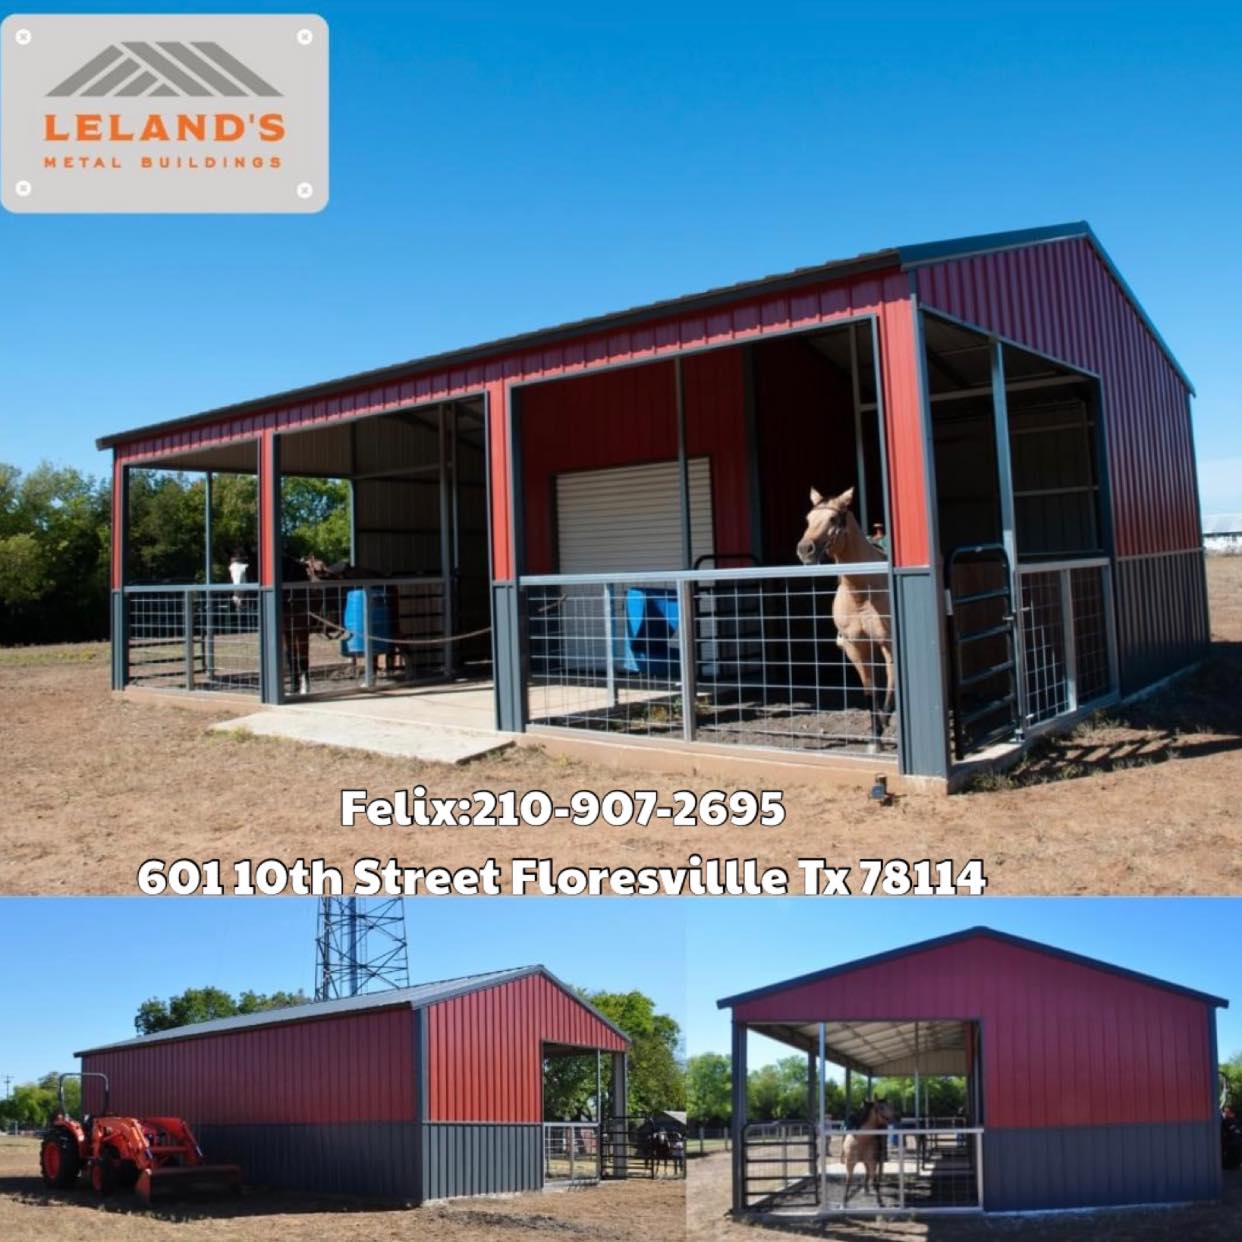 Leland's Barns & Sheds 601 10th St, Floresville Texas 78114